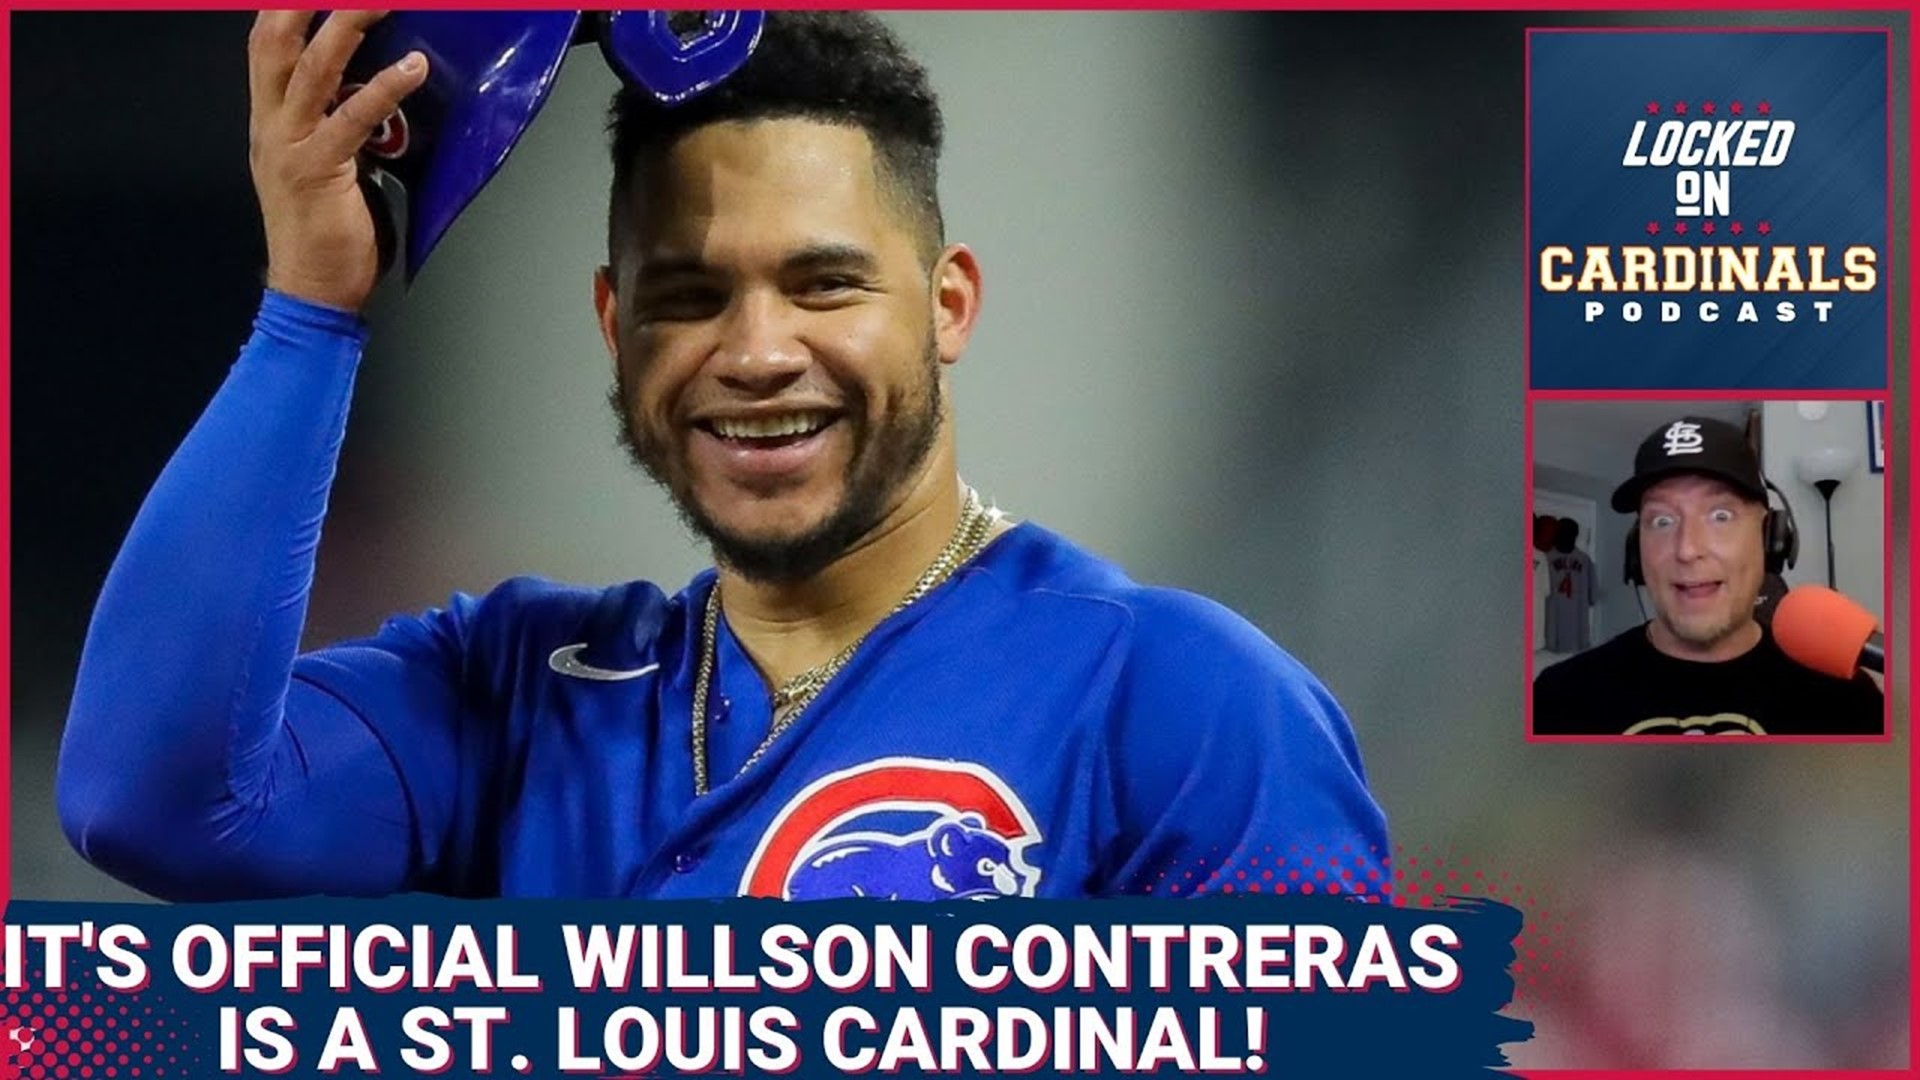 The debate is finally over... the St. Louis Cardinals have signed their new starting catcher Willson Contreras to a 5 year $87.5 million dollar contract.